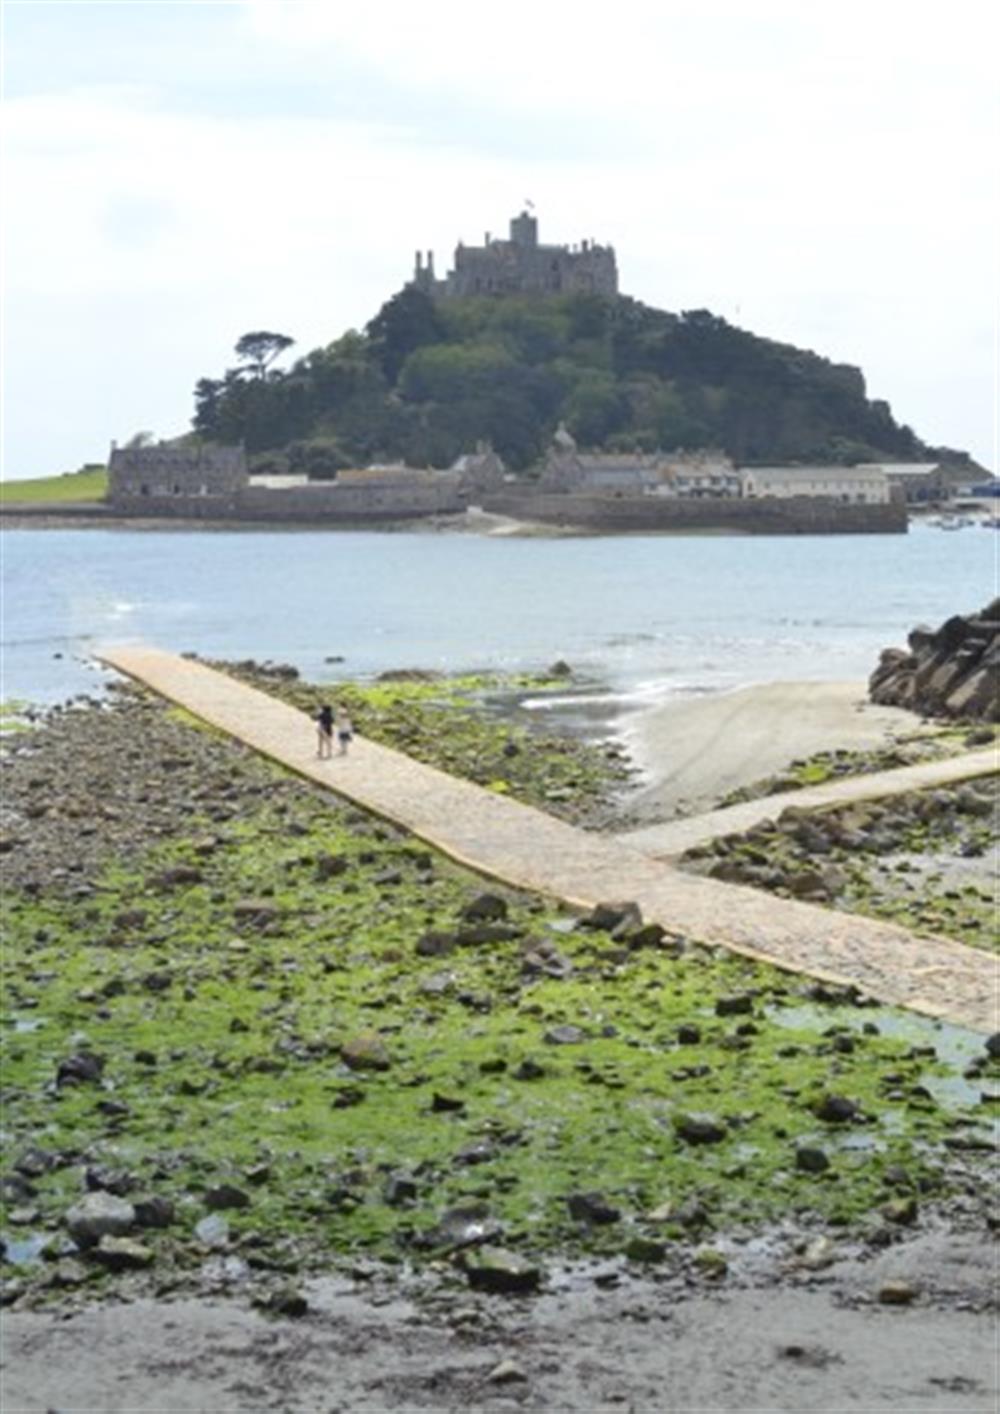 St Michael's Mount at Marazion - walk across the causeway or take the water taxi across to the castle and gardens. at PigLet in Gwennap